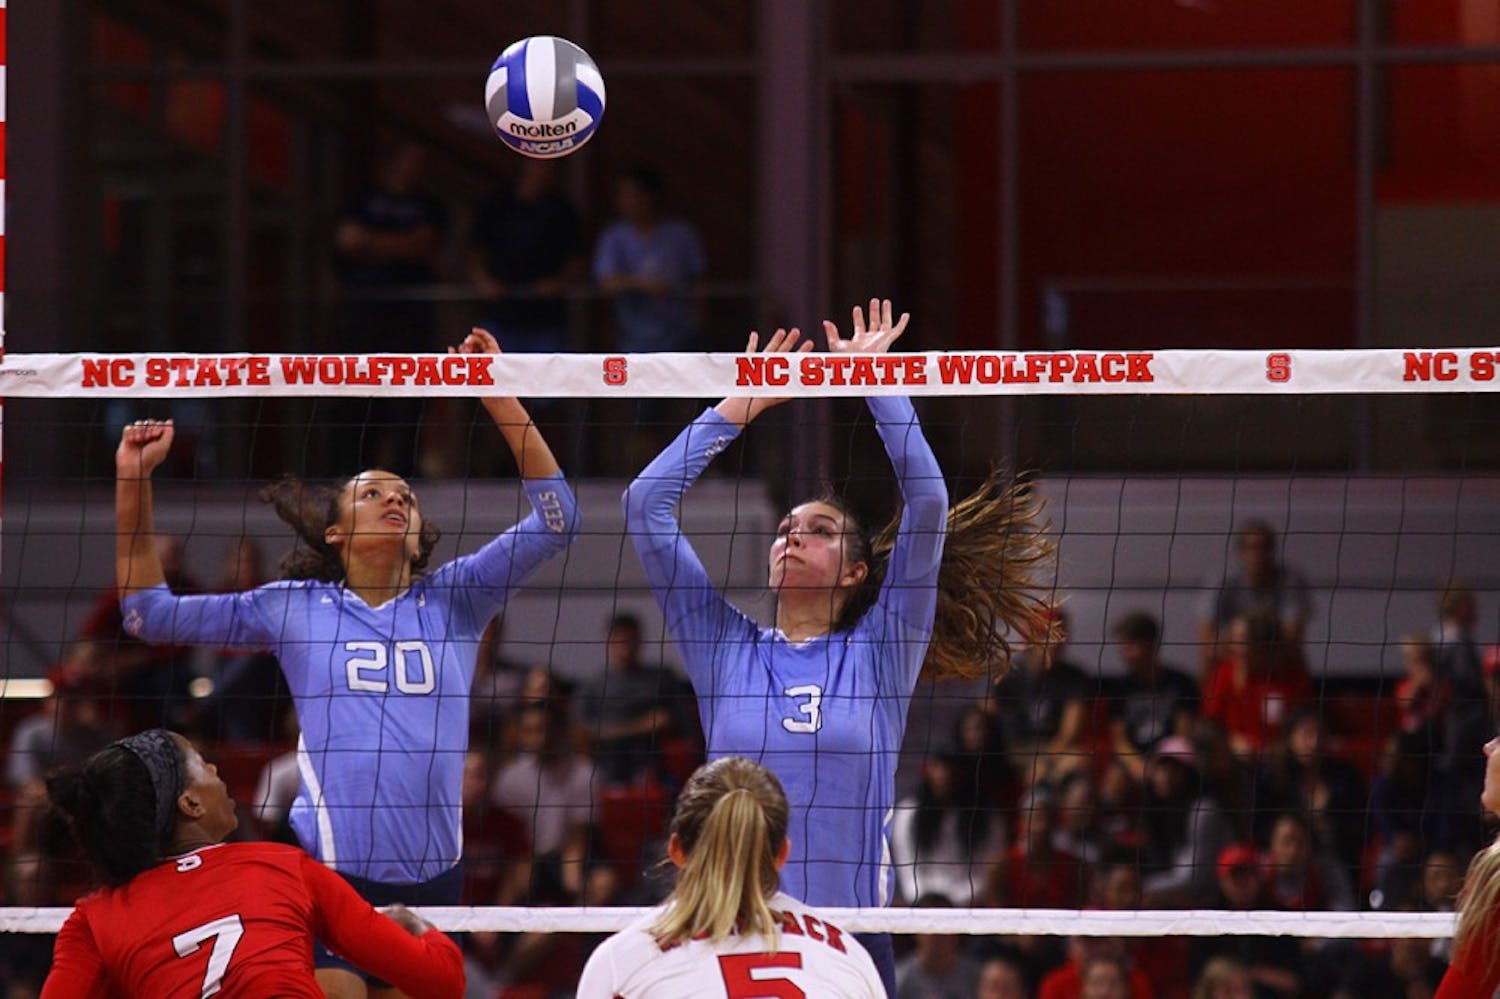 Taylor Treacy (20) and Beth Nordhorn (3) go up for the block against N.C. State.